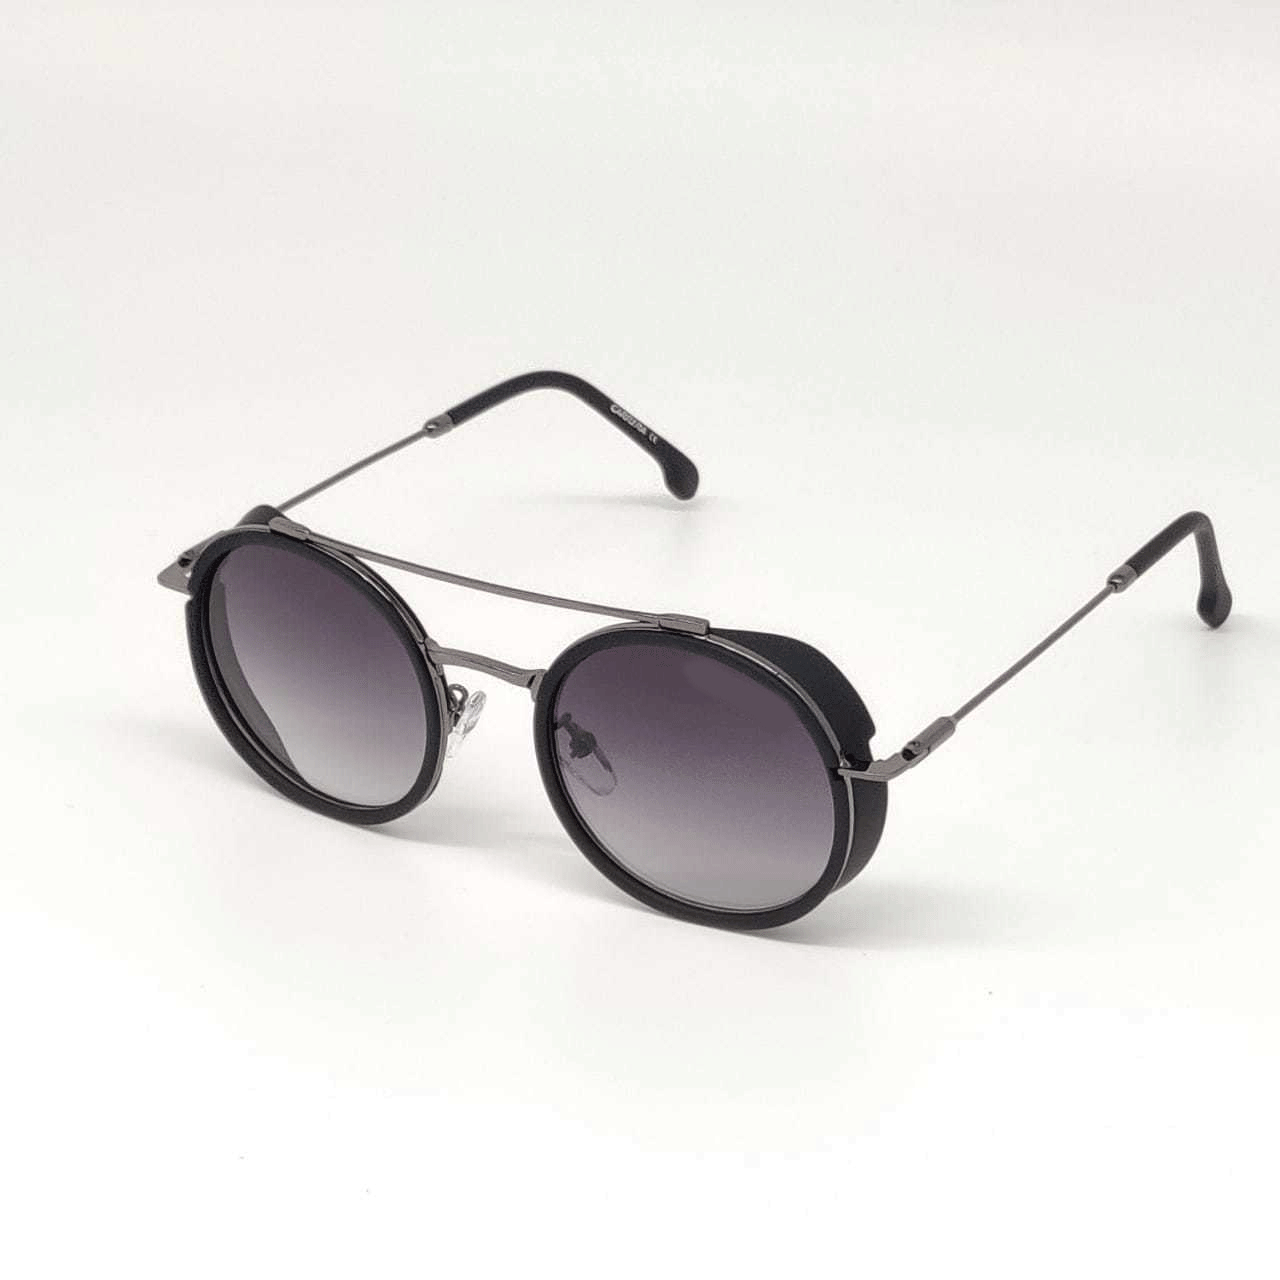 Ranveer Singh Stylish Round Sunglasses For Men And Women- Unique and Classy